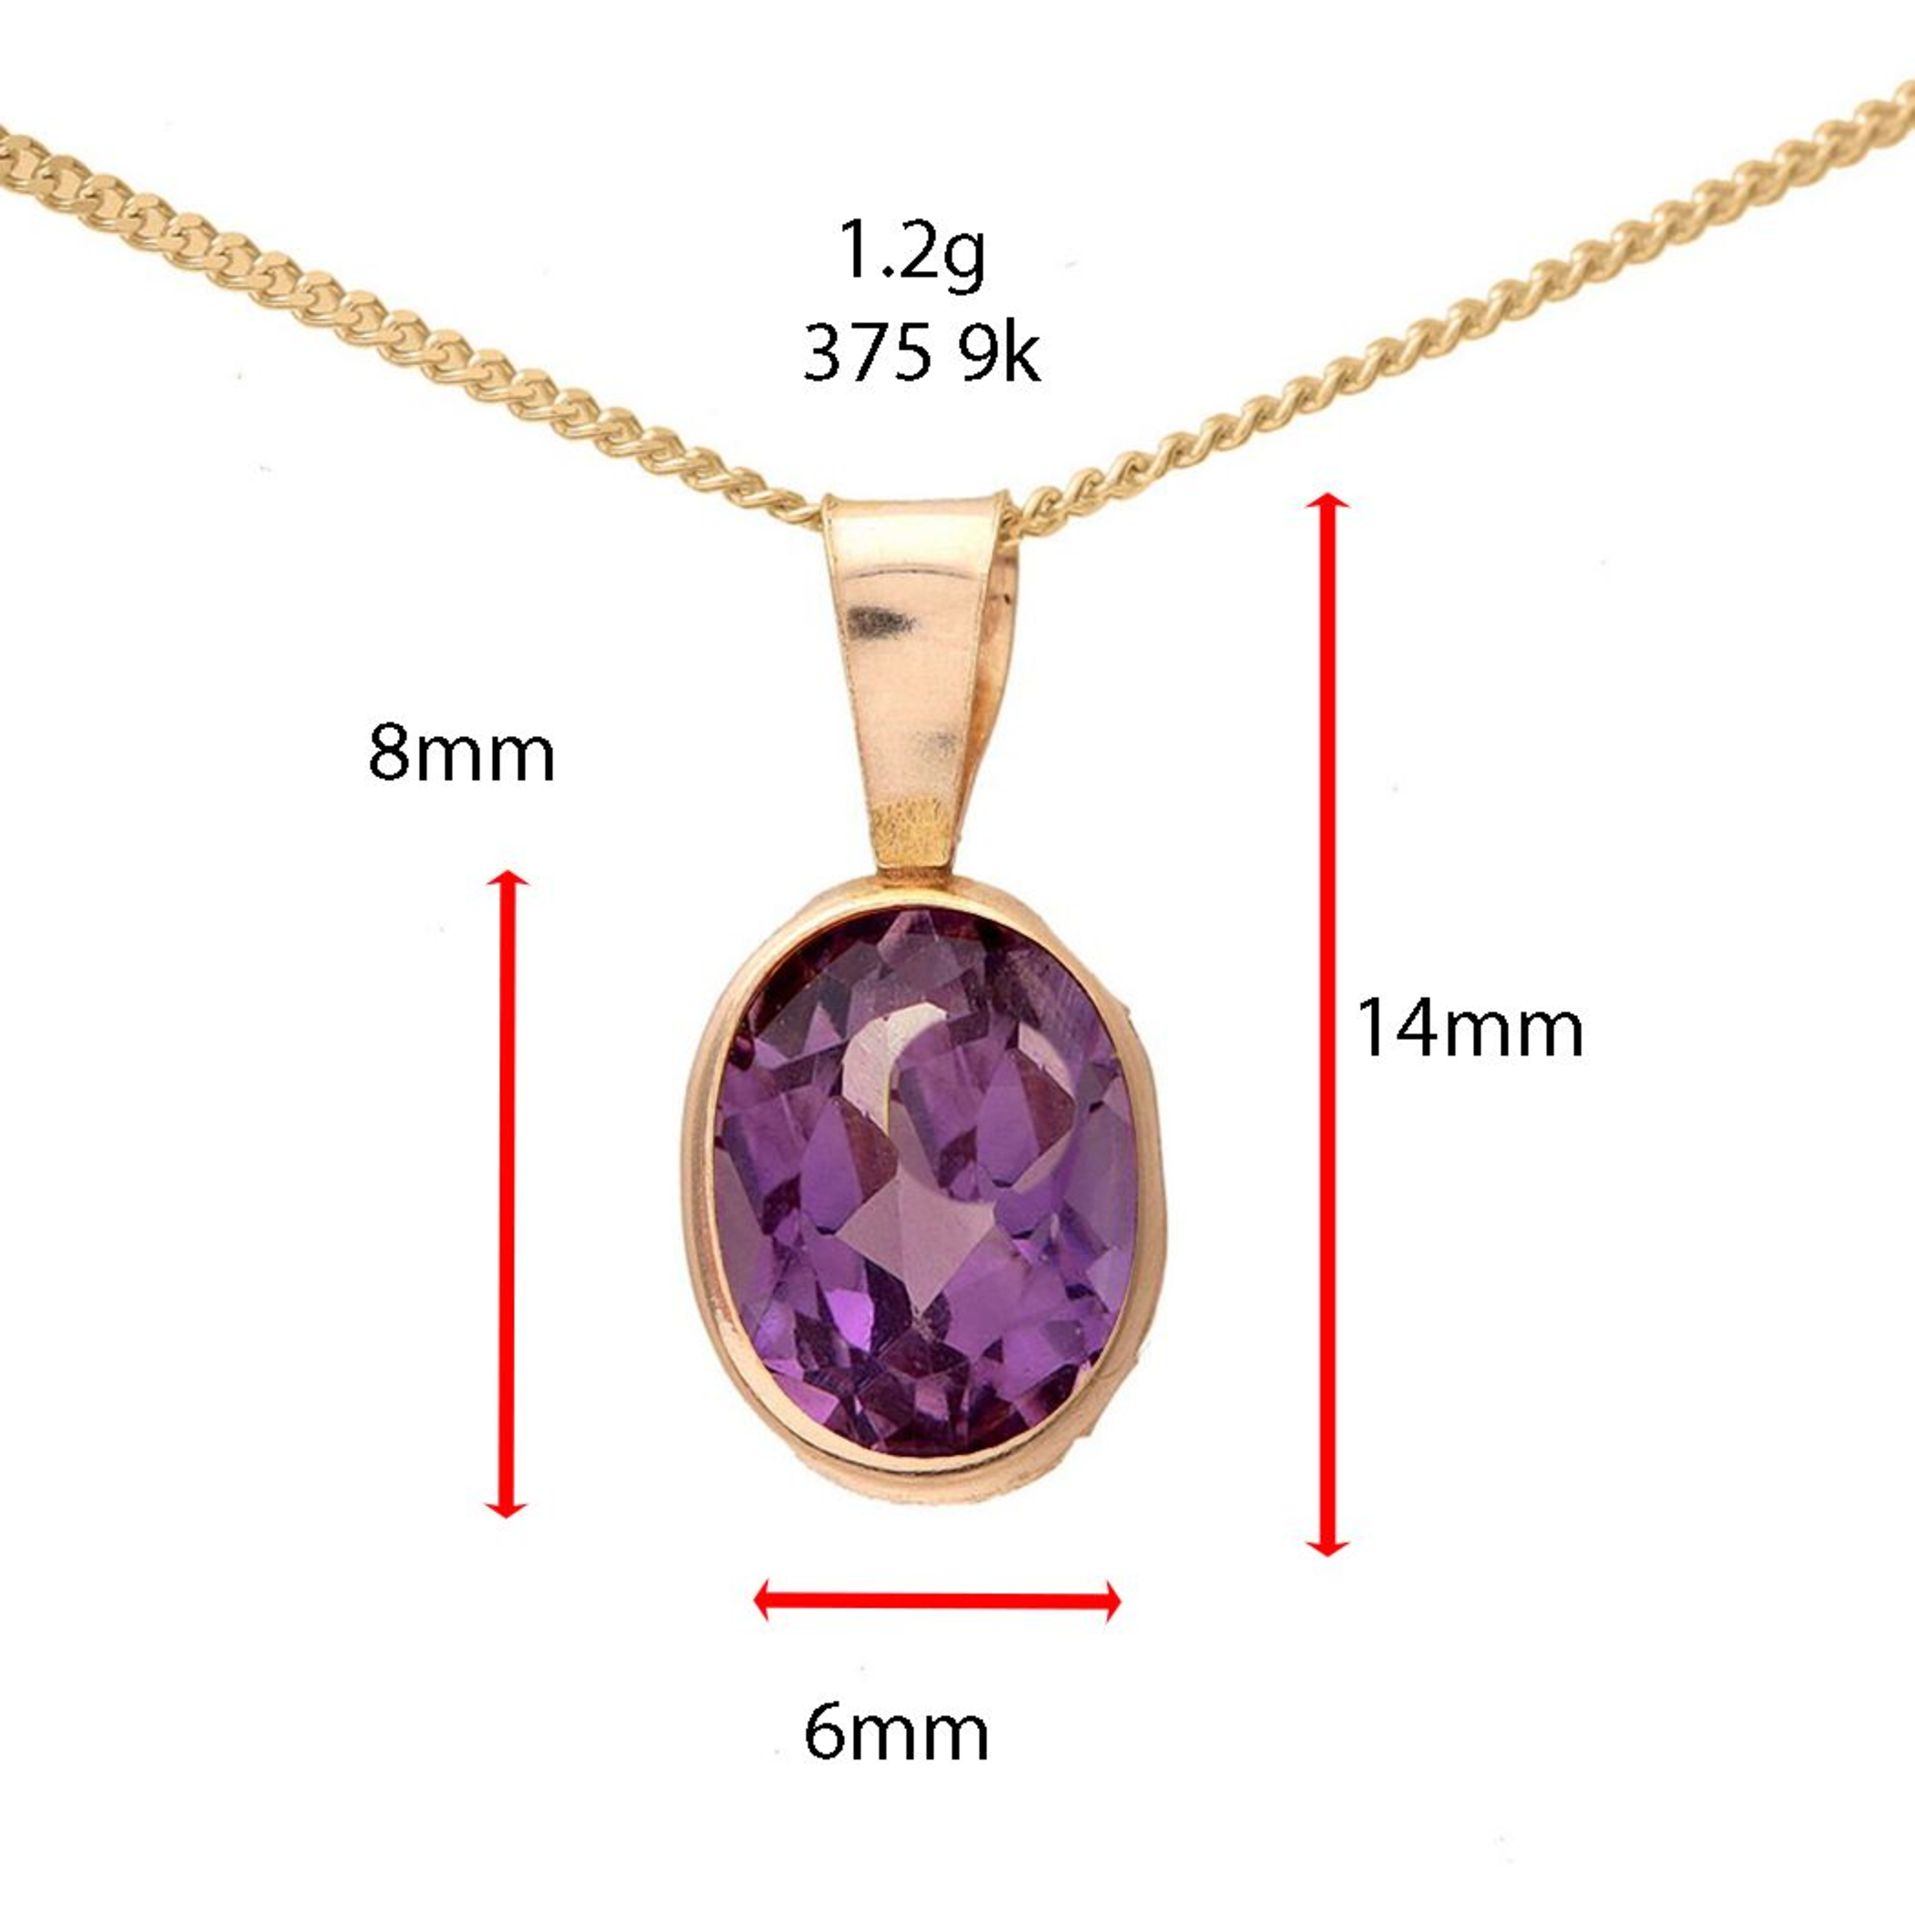 Oval Amethyst Natural Gemstone Pendant With 18" Chain, Metal 9ct Yellow Gold, Weight (g) 1.2, RRP £ - Image 2 of 3